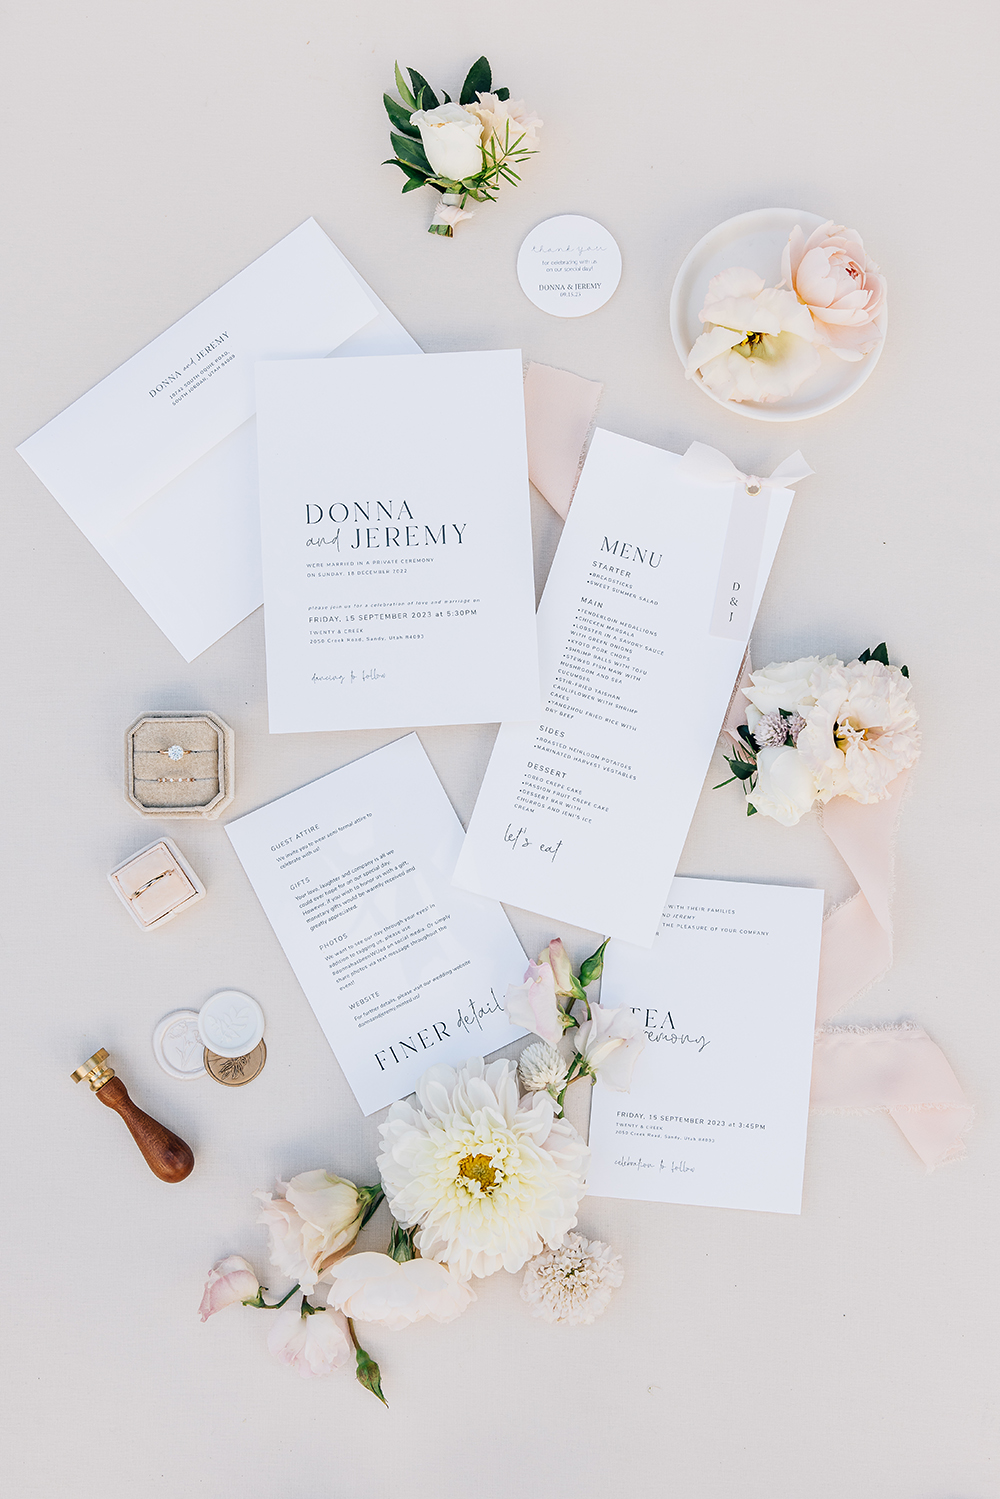 Dreamy light pink and cream flat lay of wedding day printed items, surrounded by peonies, unique details like a wax seal, and wedding rings. Menu invitation suite ceremony boutonniere wedding florals vendor Mississippi South Haven#missippiweddingphotographer #tennesseweddingphotographer #KaileeMatsumura #Bartletttennesse #southhavenmissippi

